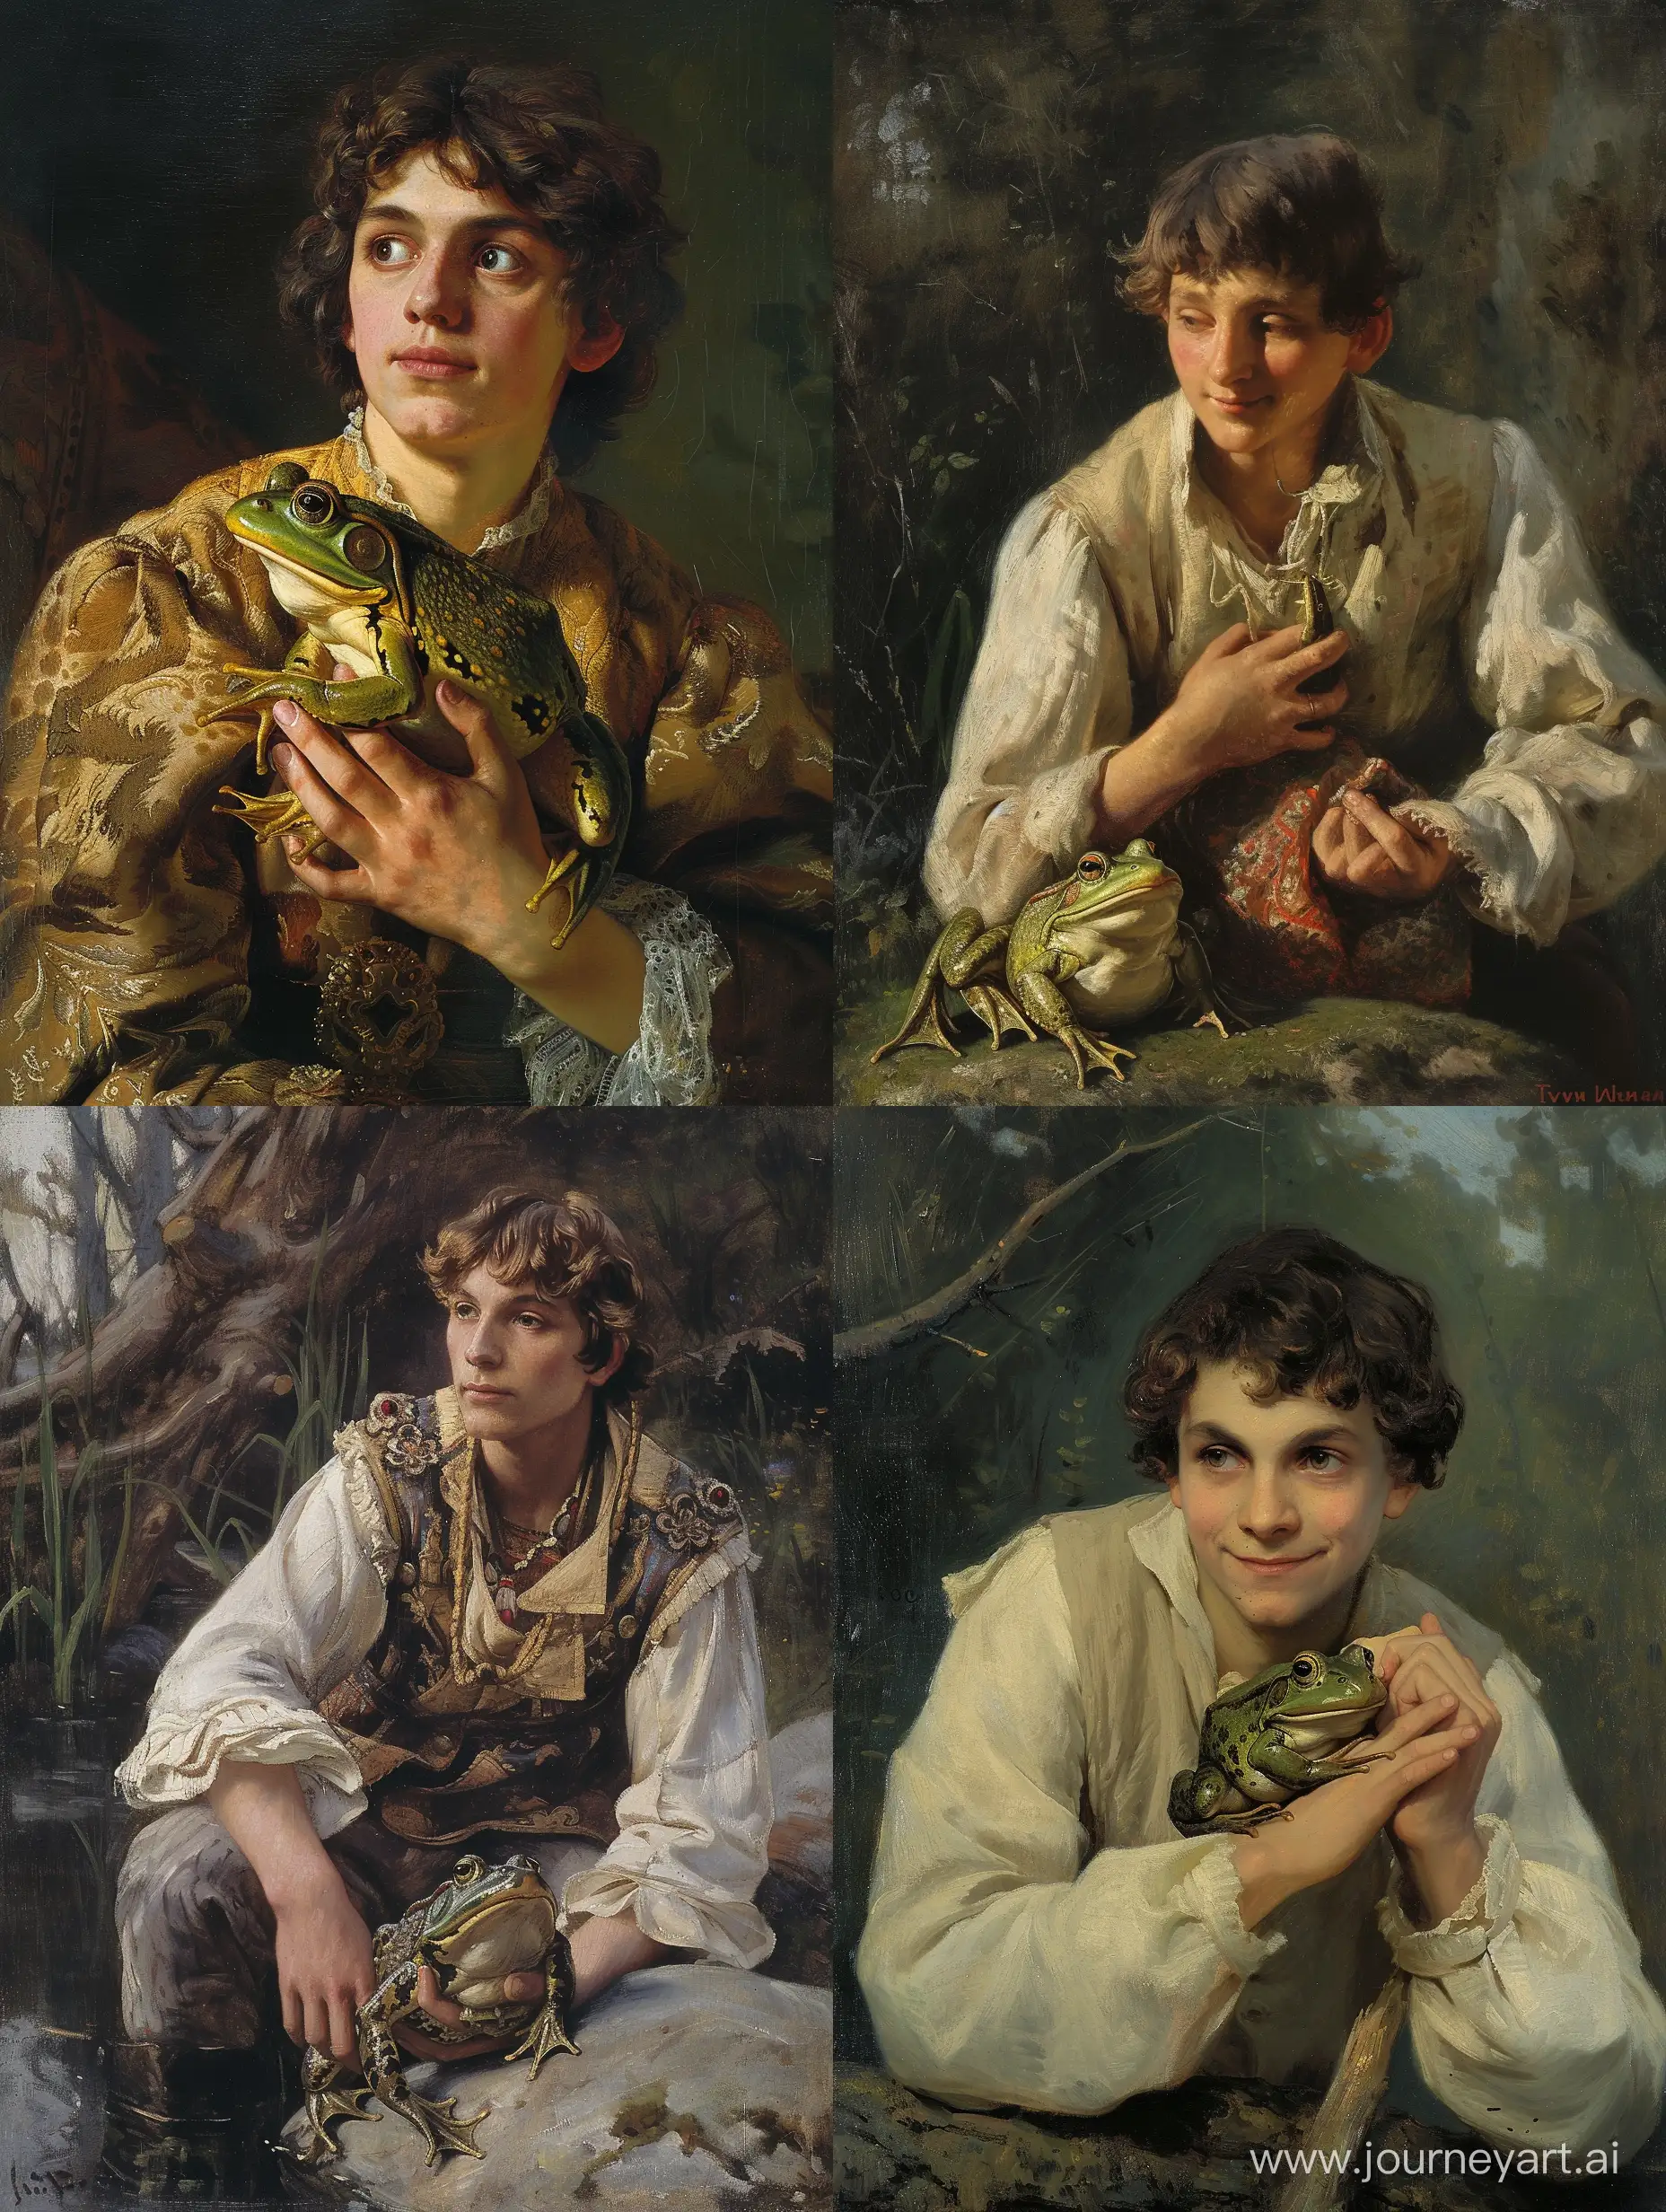 Ivan-Tsarevich-and-the-Frog-Enchanting-Young-Man-in-a-Fairytale-Encounter